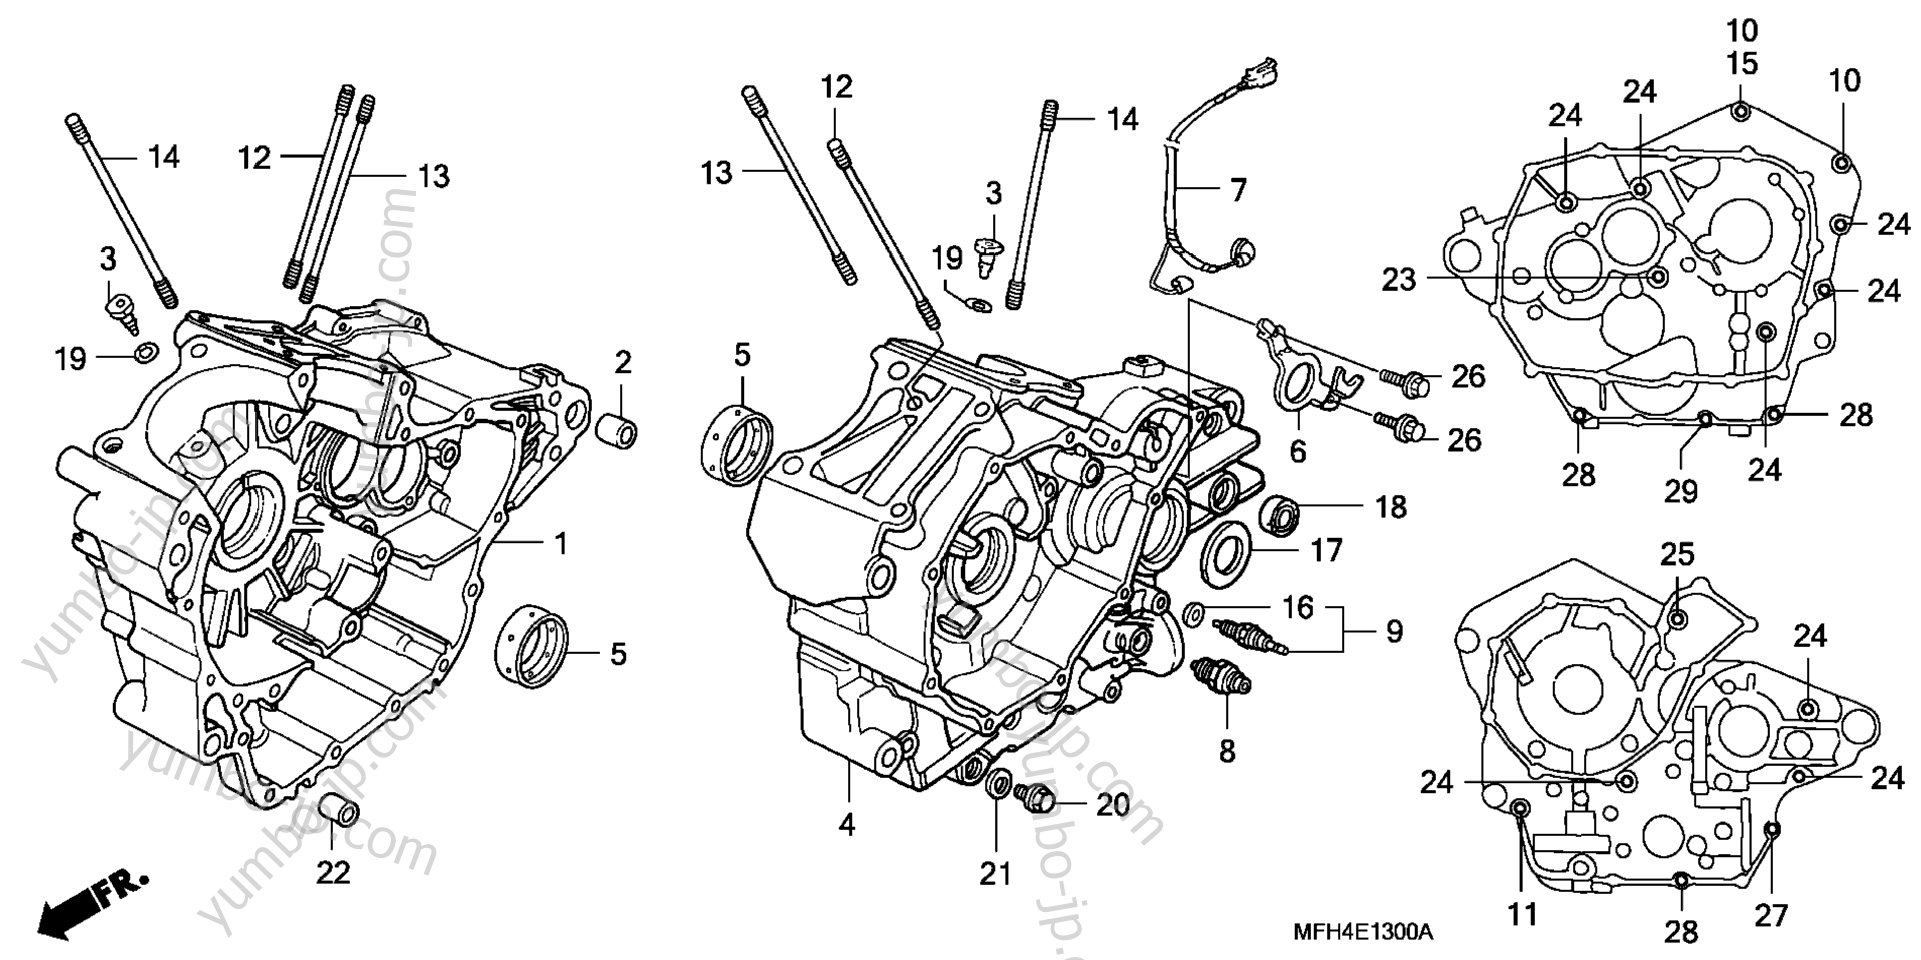 CRANKCASE for motorcycles HONDA VT600C AC/A 2006 year